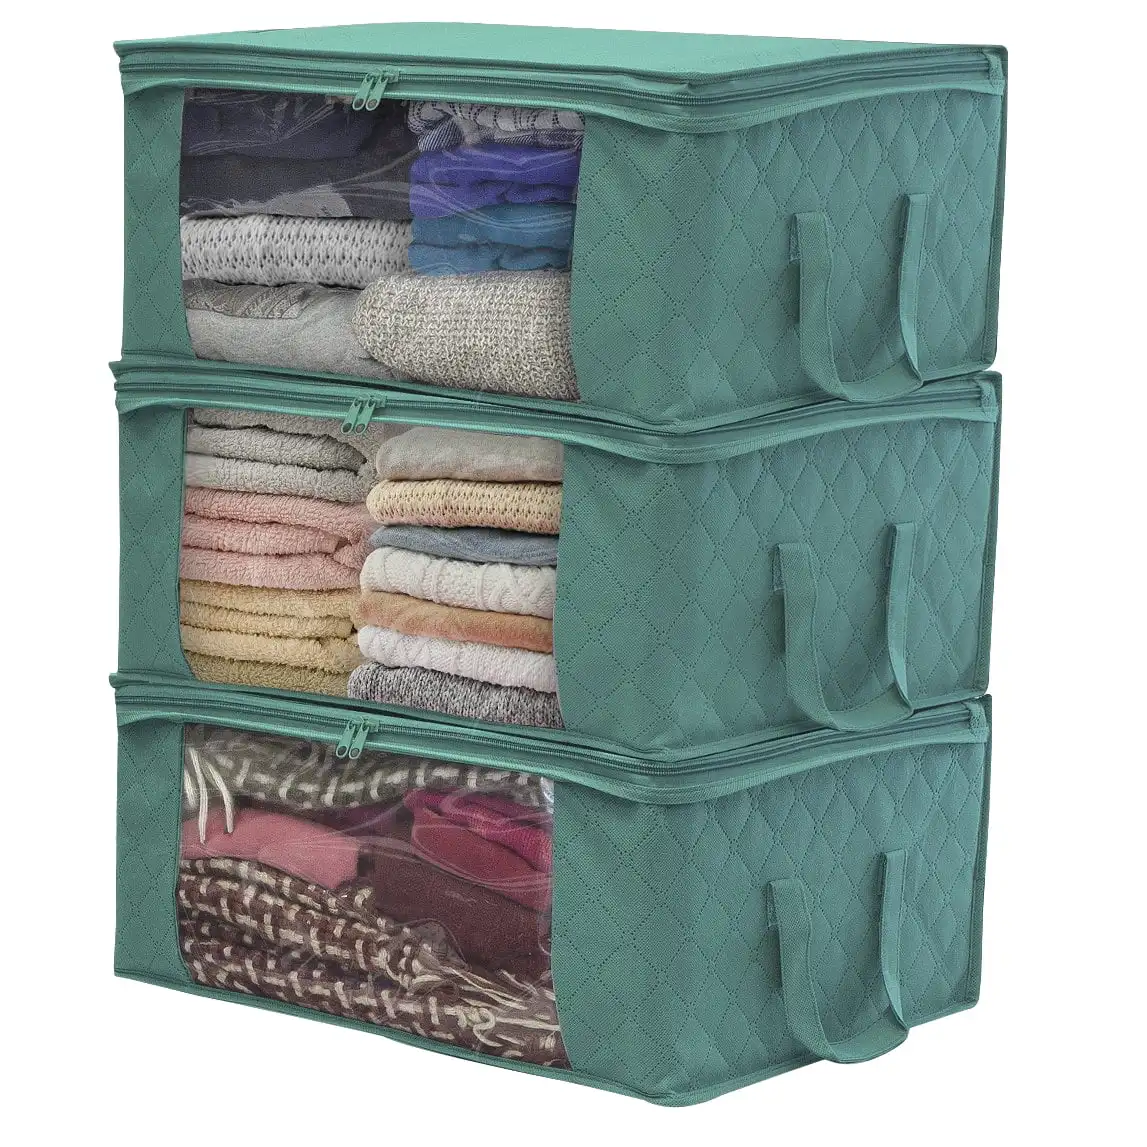 

Foldable Storage Bag Organizers, Clear Window & Carry Handles, Great for Clothes, Blankets, Closets, Bedrooms, and More